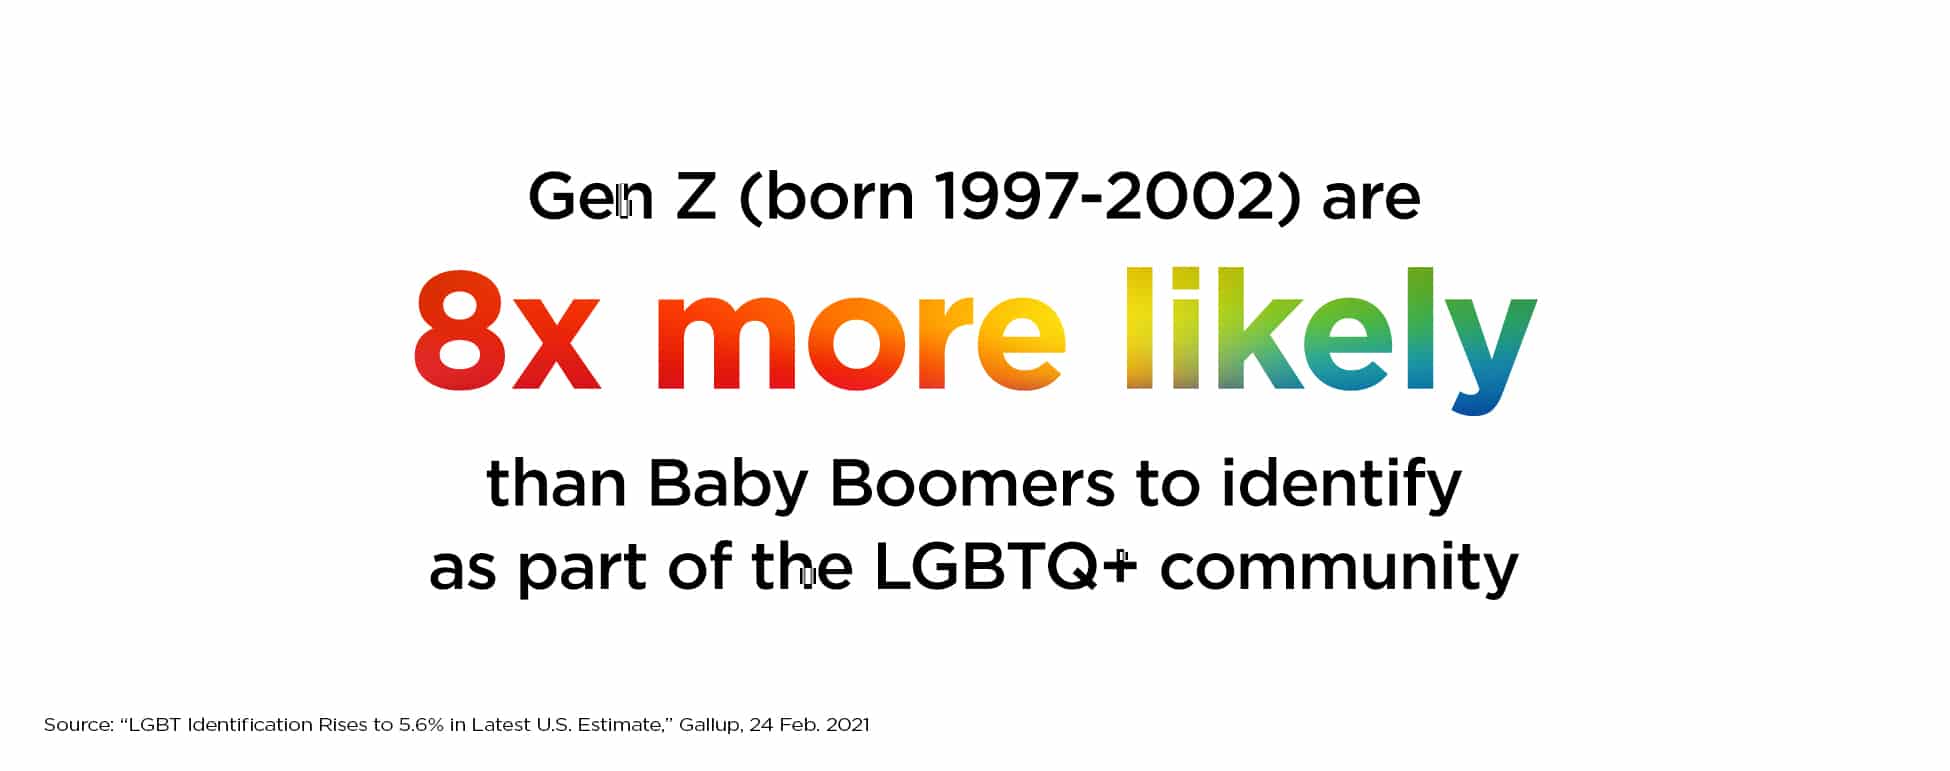 Gen Z (born 1997-2002) are 8x more likely than Baby Boomers to identify as part of the LGBTQ+ community